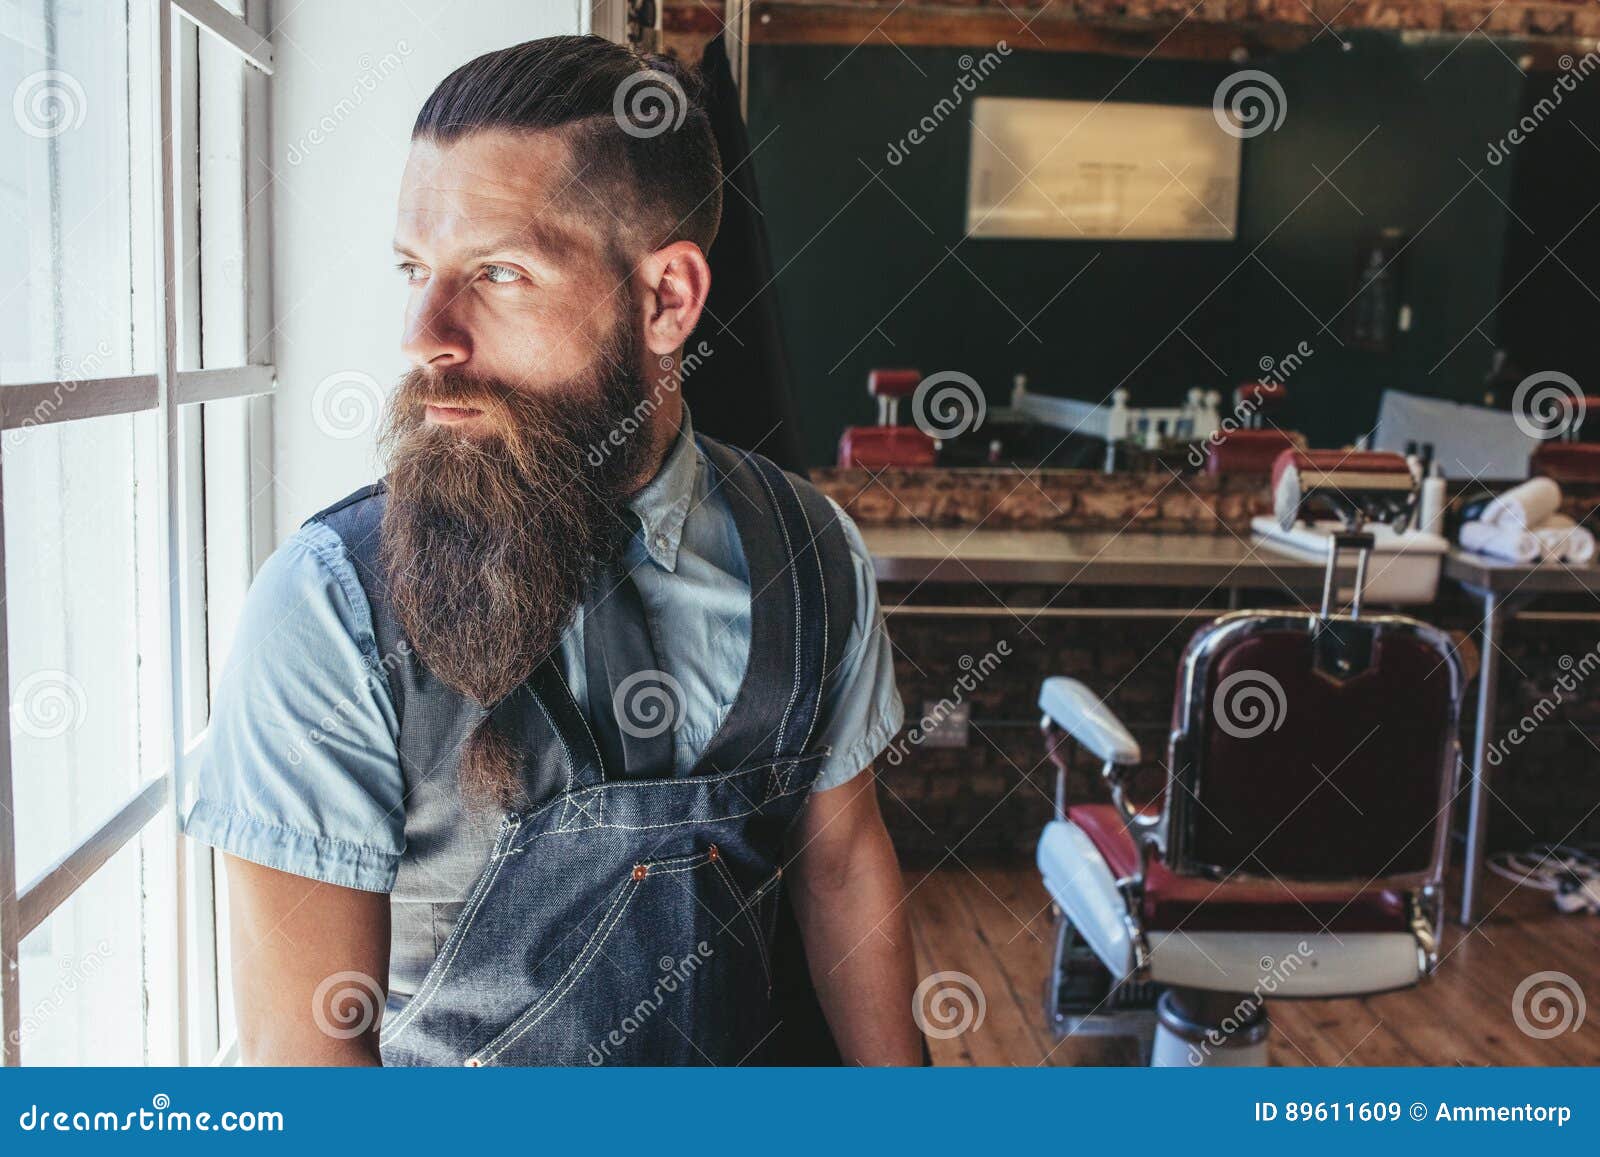 Barber Standing by Window and Looking Away Stock Image - Image of ...